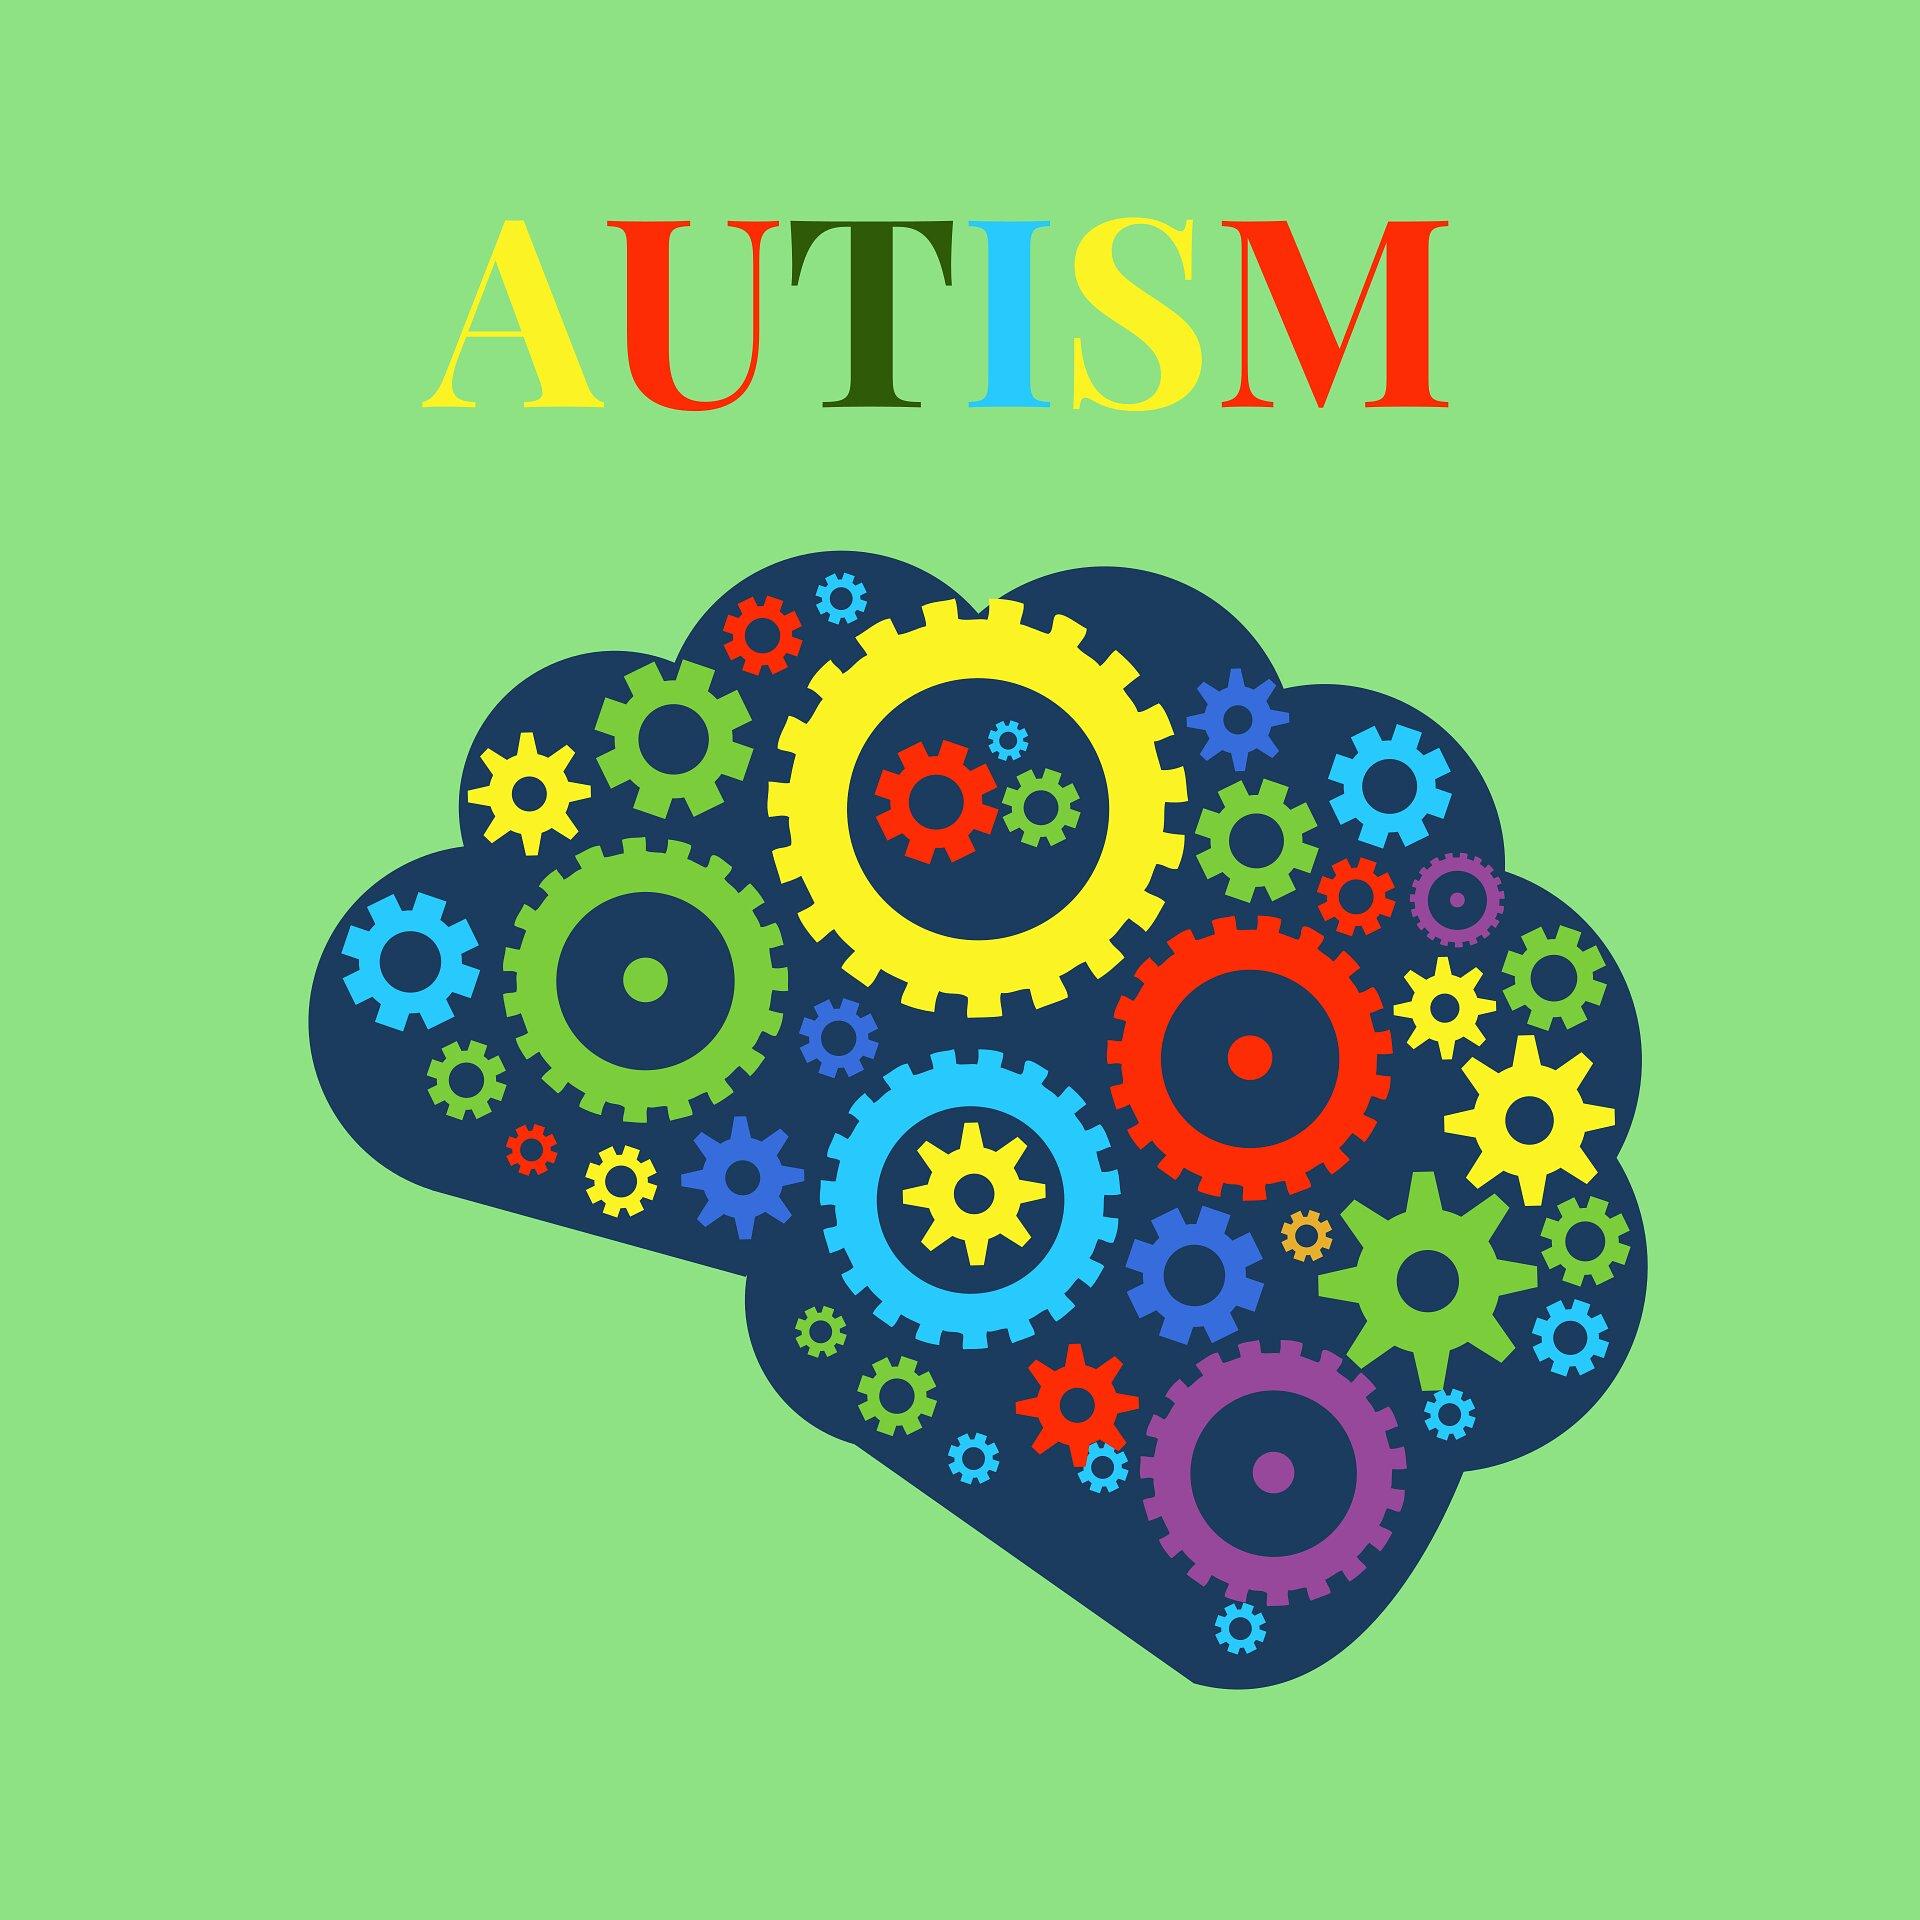 Key Findings from the Latest Research on Autism and ADHD Prevention